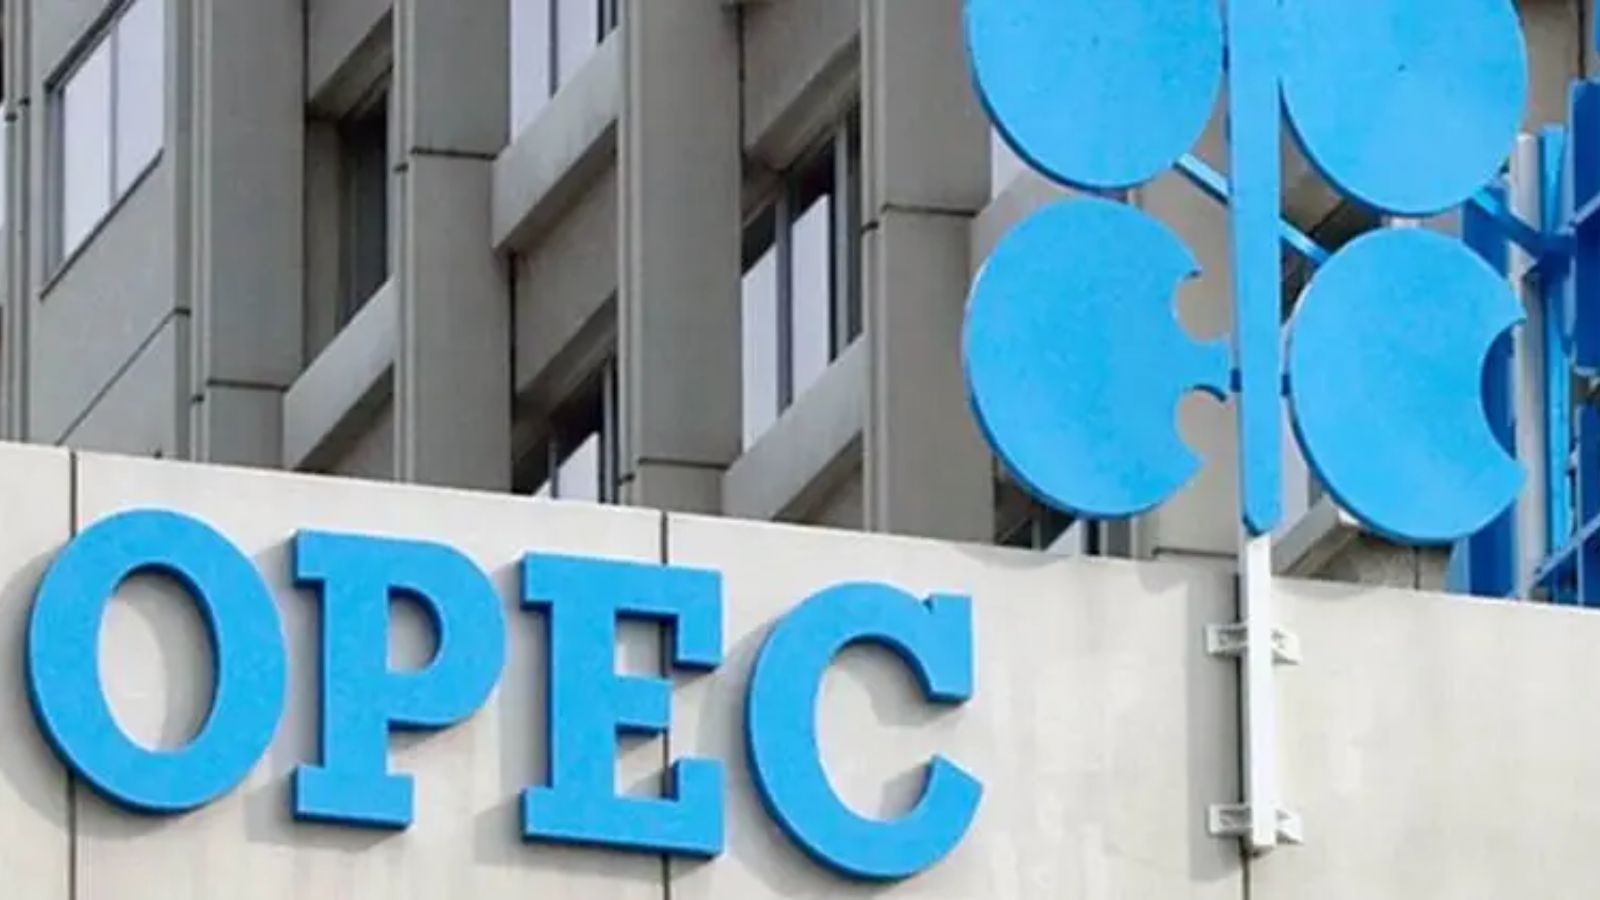 in leaked letter, opec secy gen asks members to reject any language on fossil fuel phase-out